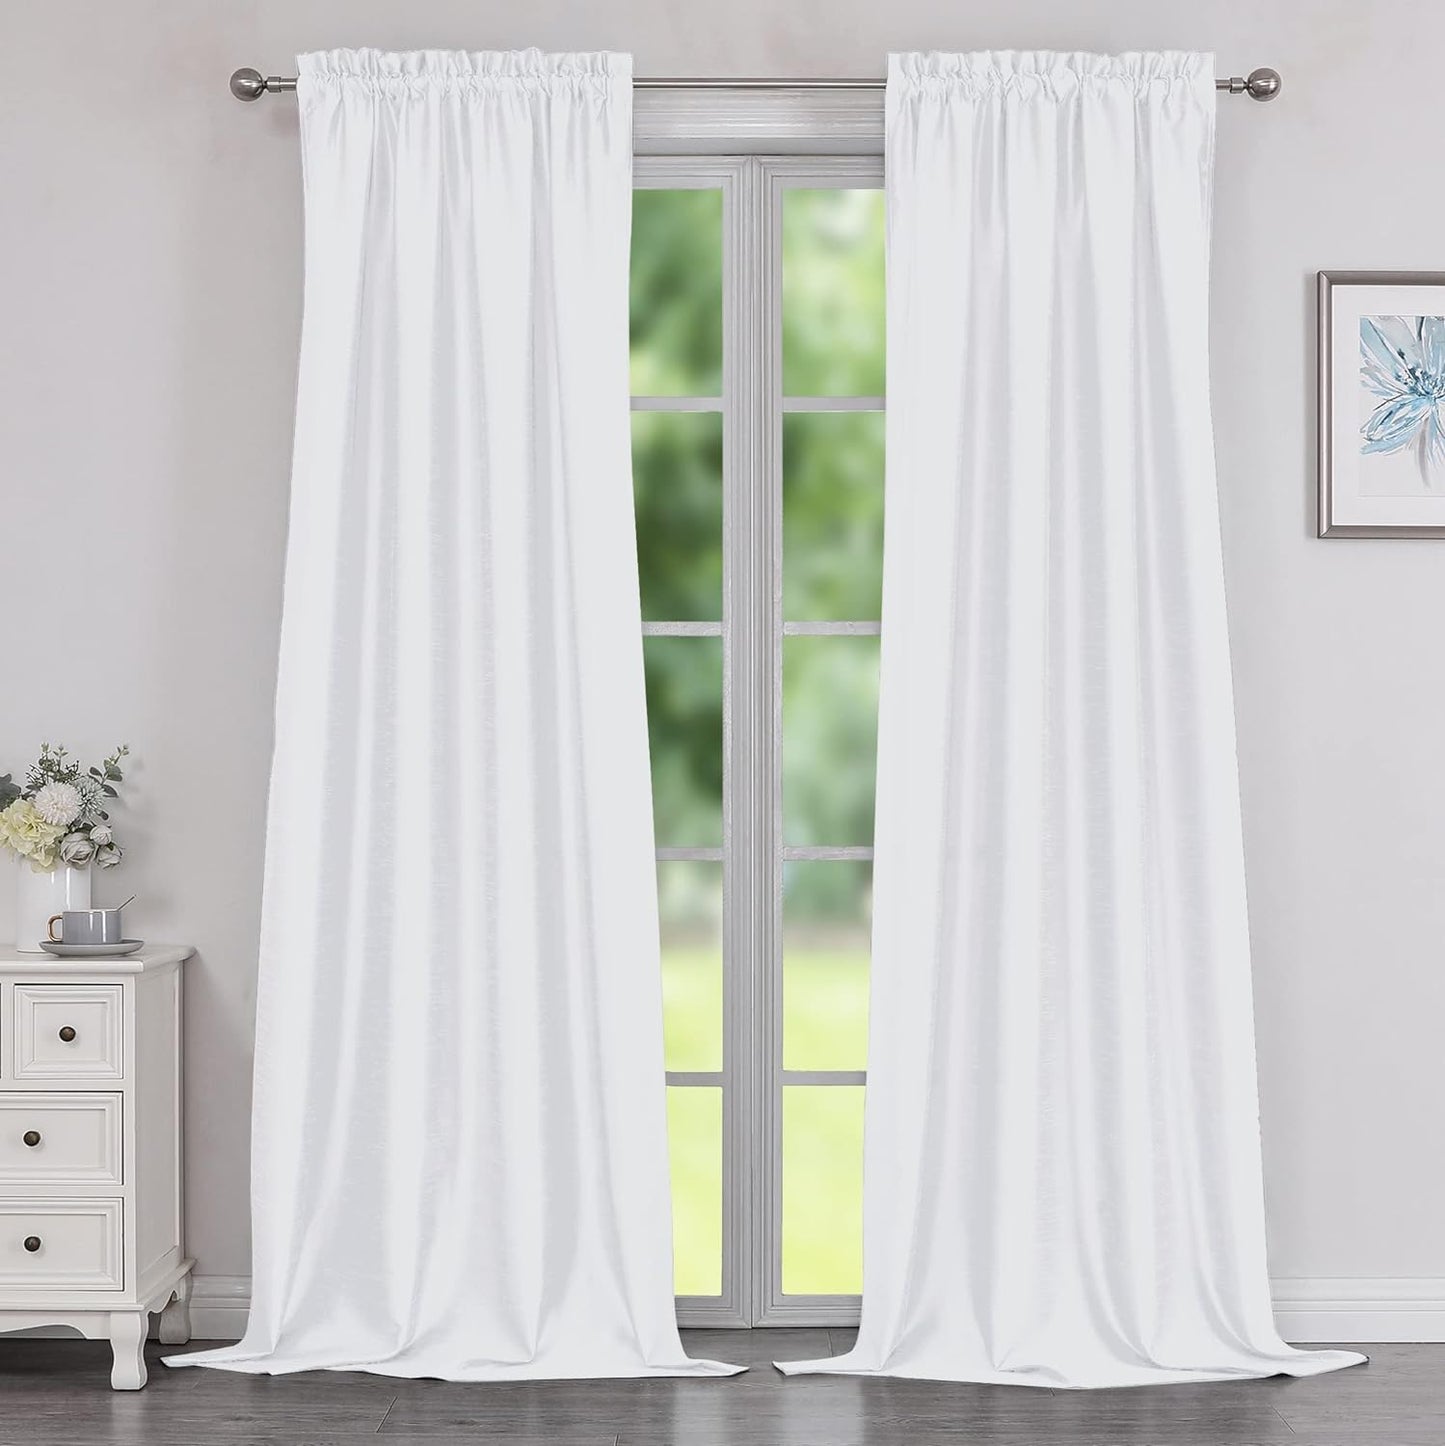 Chyhomenyc Uptown Sage Green Kitchen Curtains 45 Inch Length 2 Panels, Room Darkening Faux Silk Chic Fabric Short Window Curtains for Bedroom Living Room, Each 30Wx45L  Chyhomenyc White 2X40"Wx96"L 